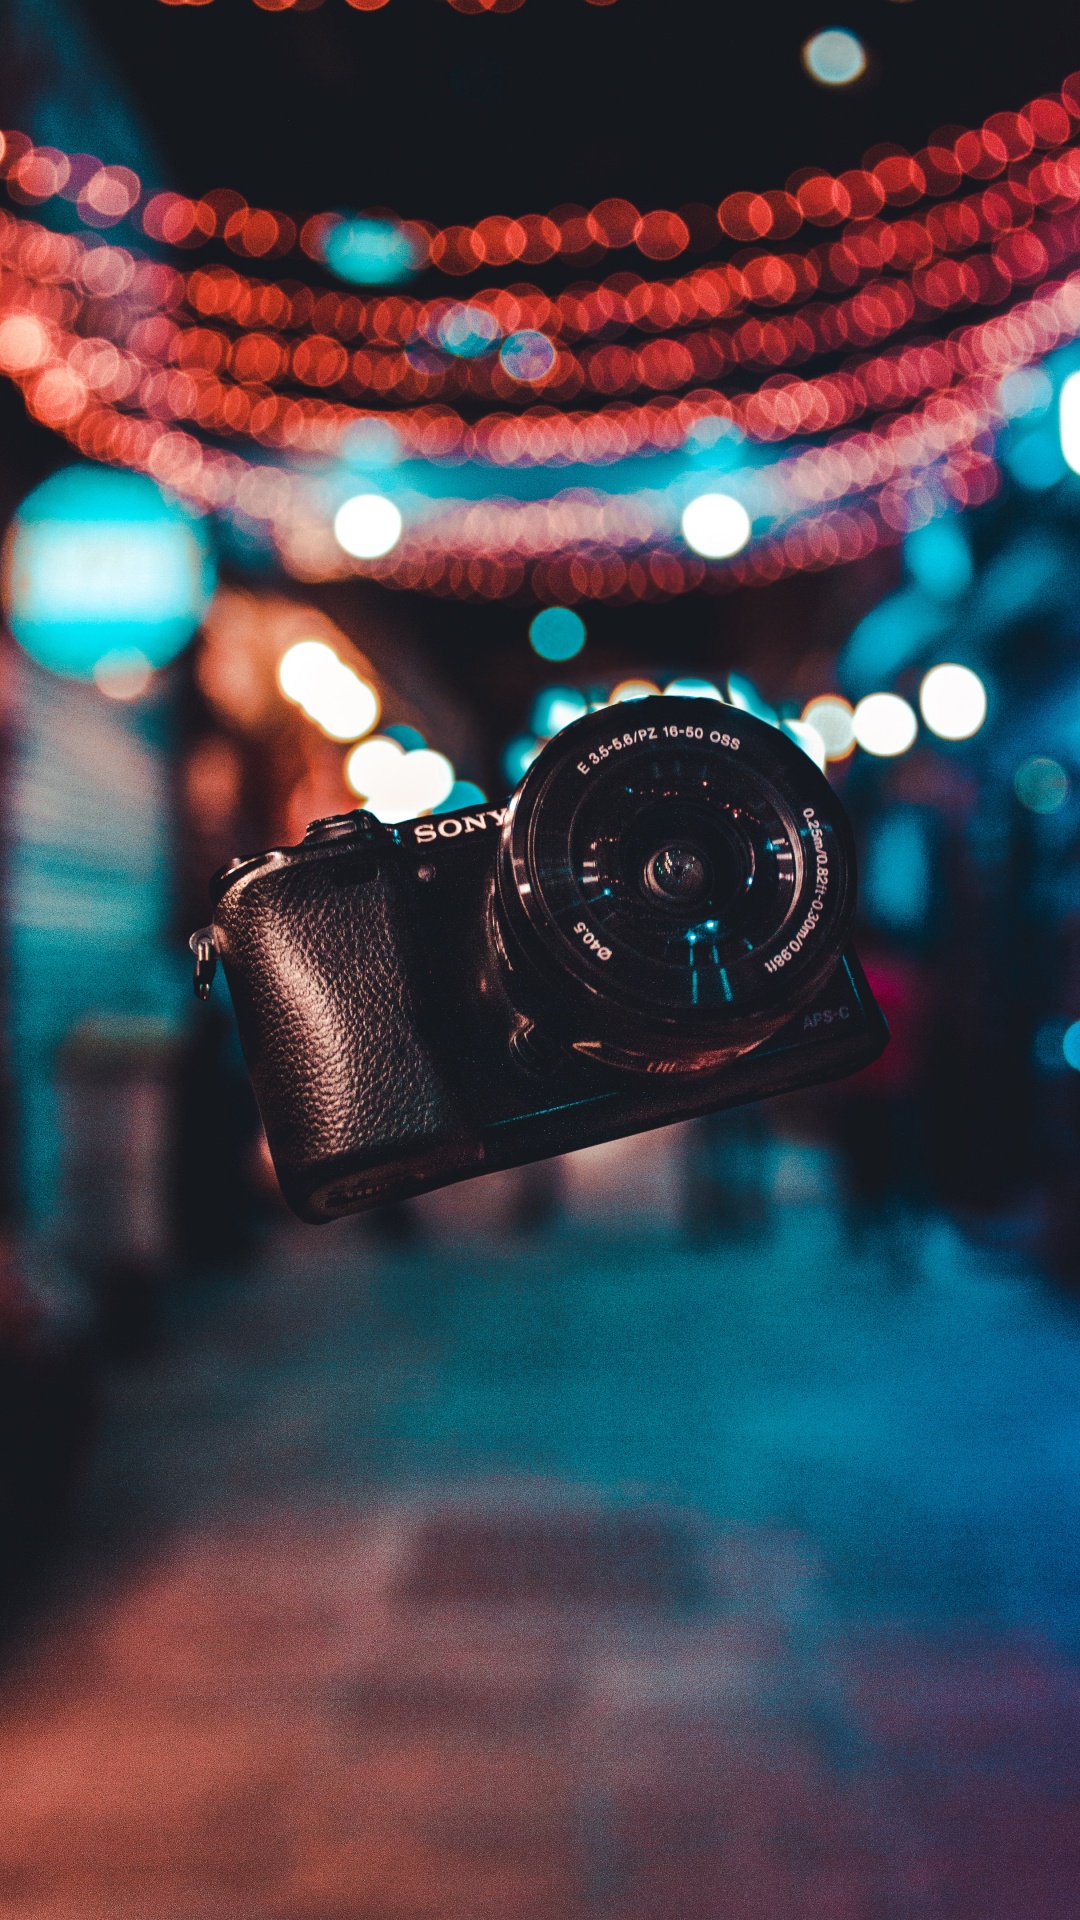 Black Dslr Camera on Blue and White String Lights. Wallpaper in 1080x1920 Resolution